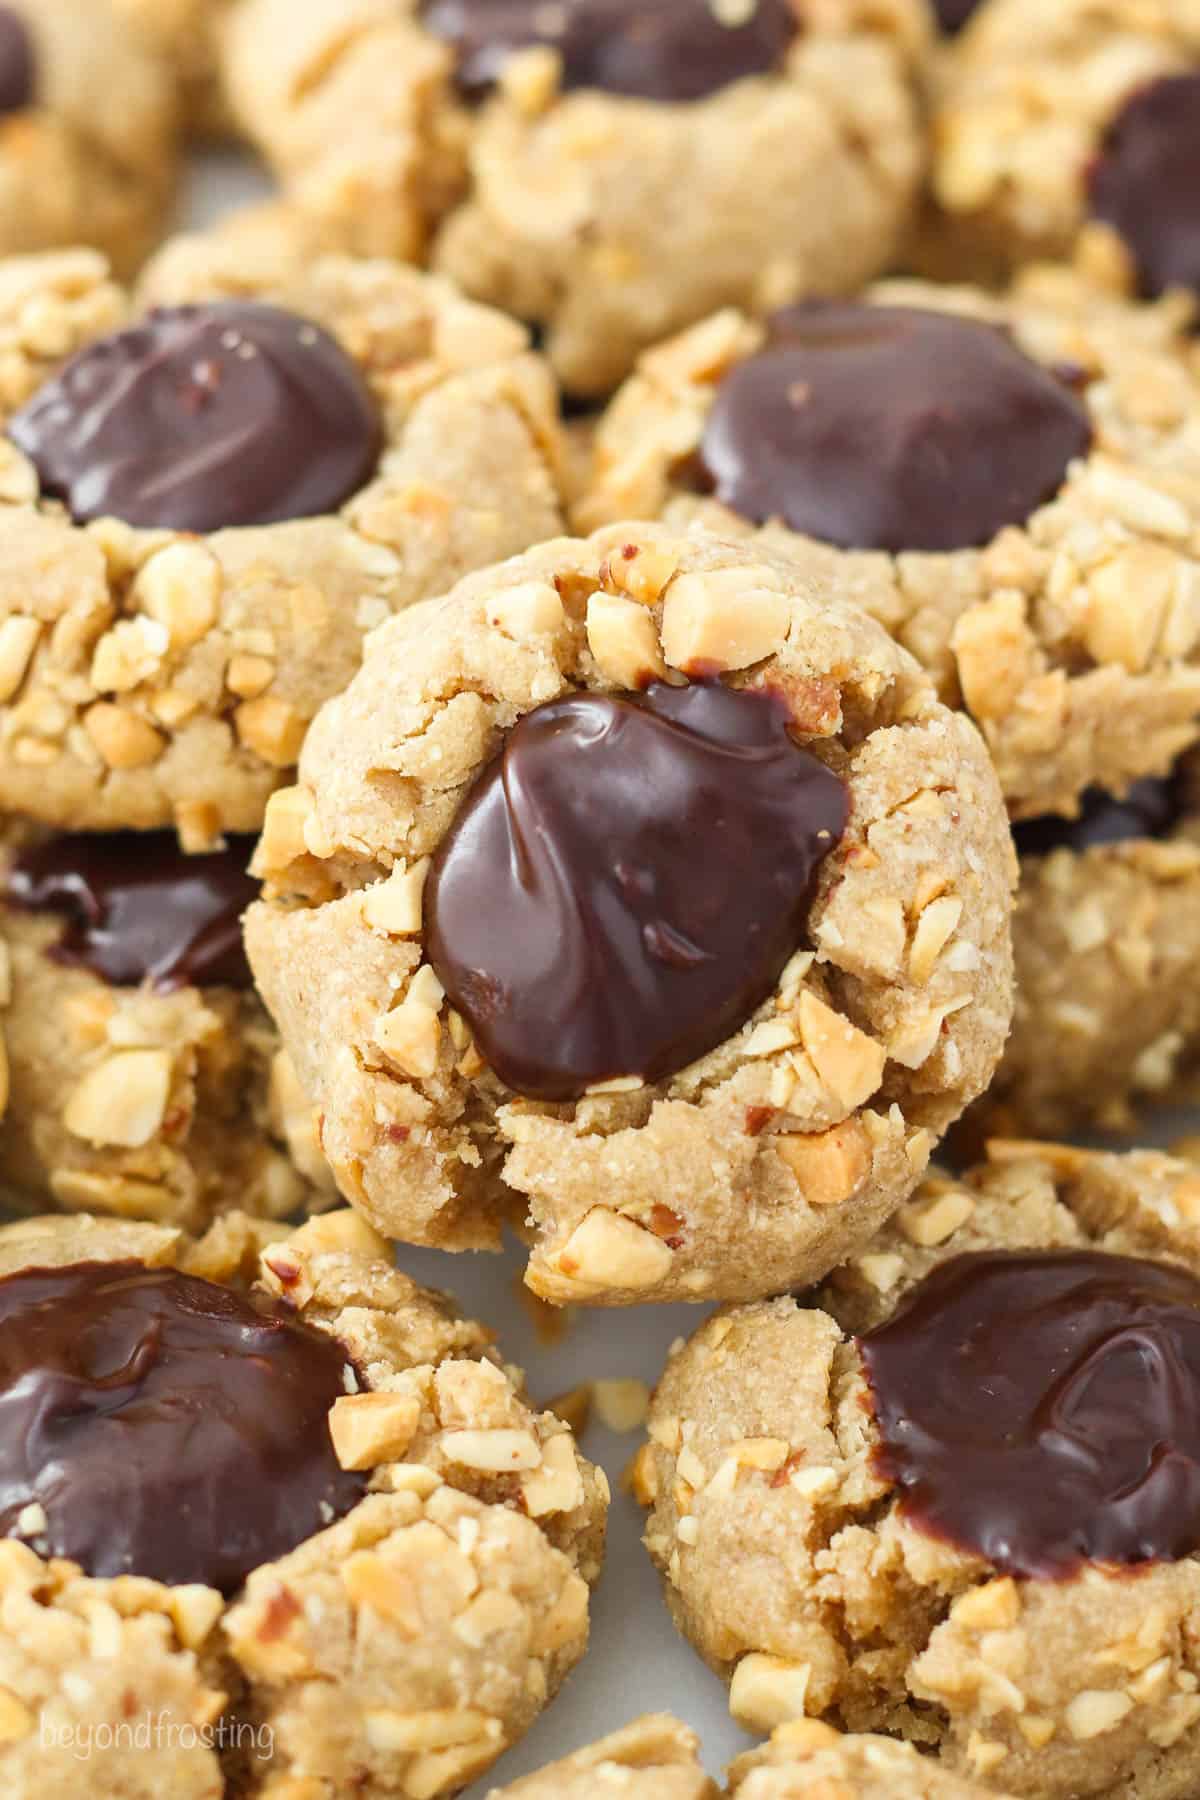 A close up of a peanut butter thumbprint cookie with a chocolate filling